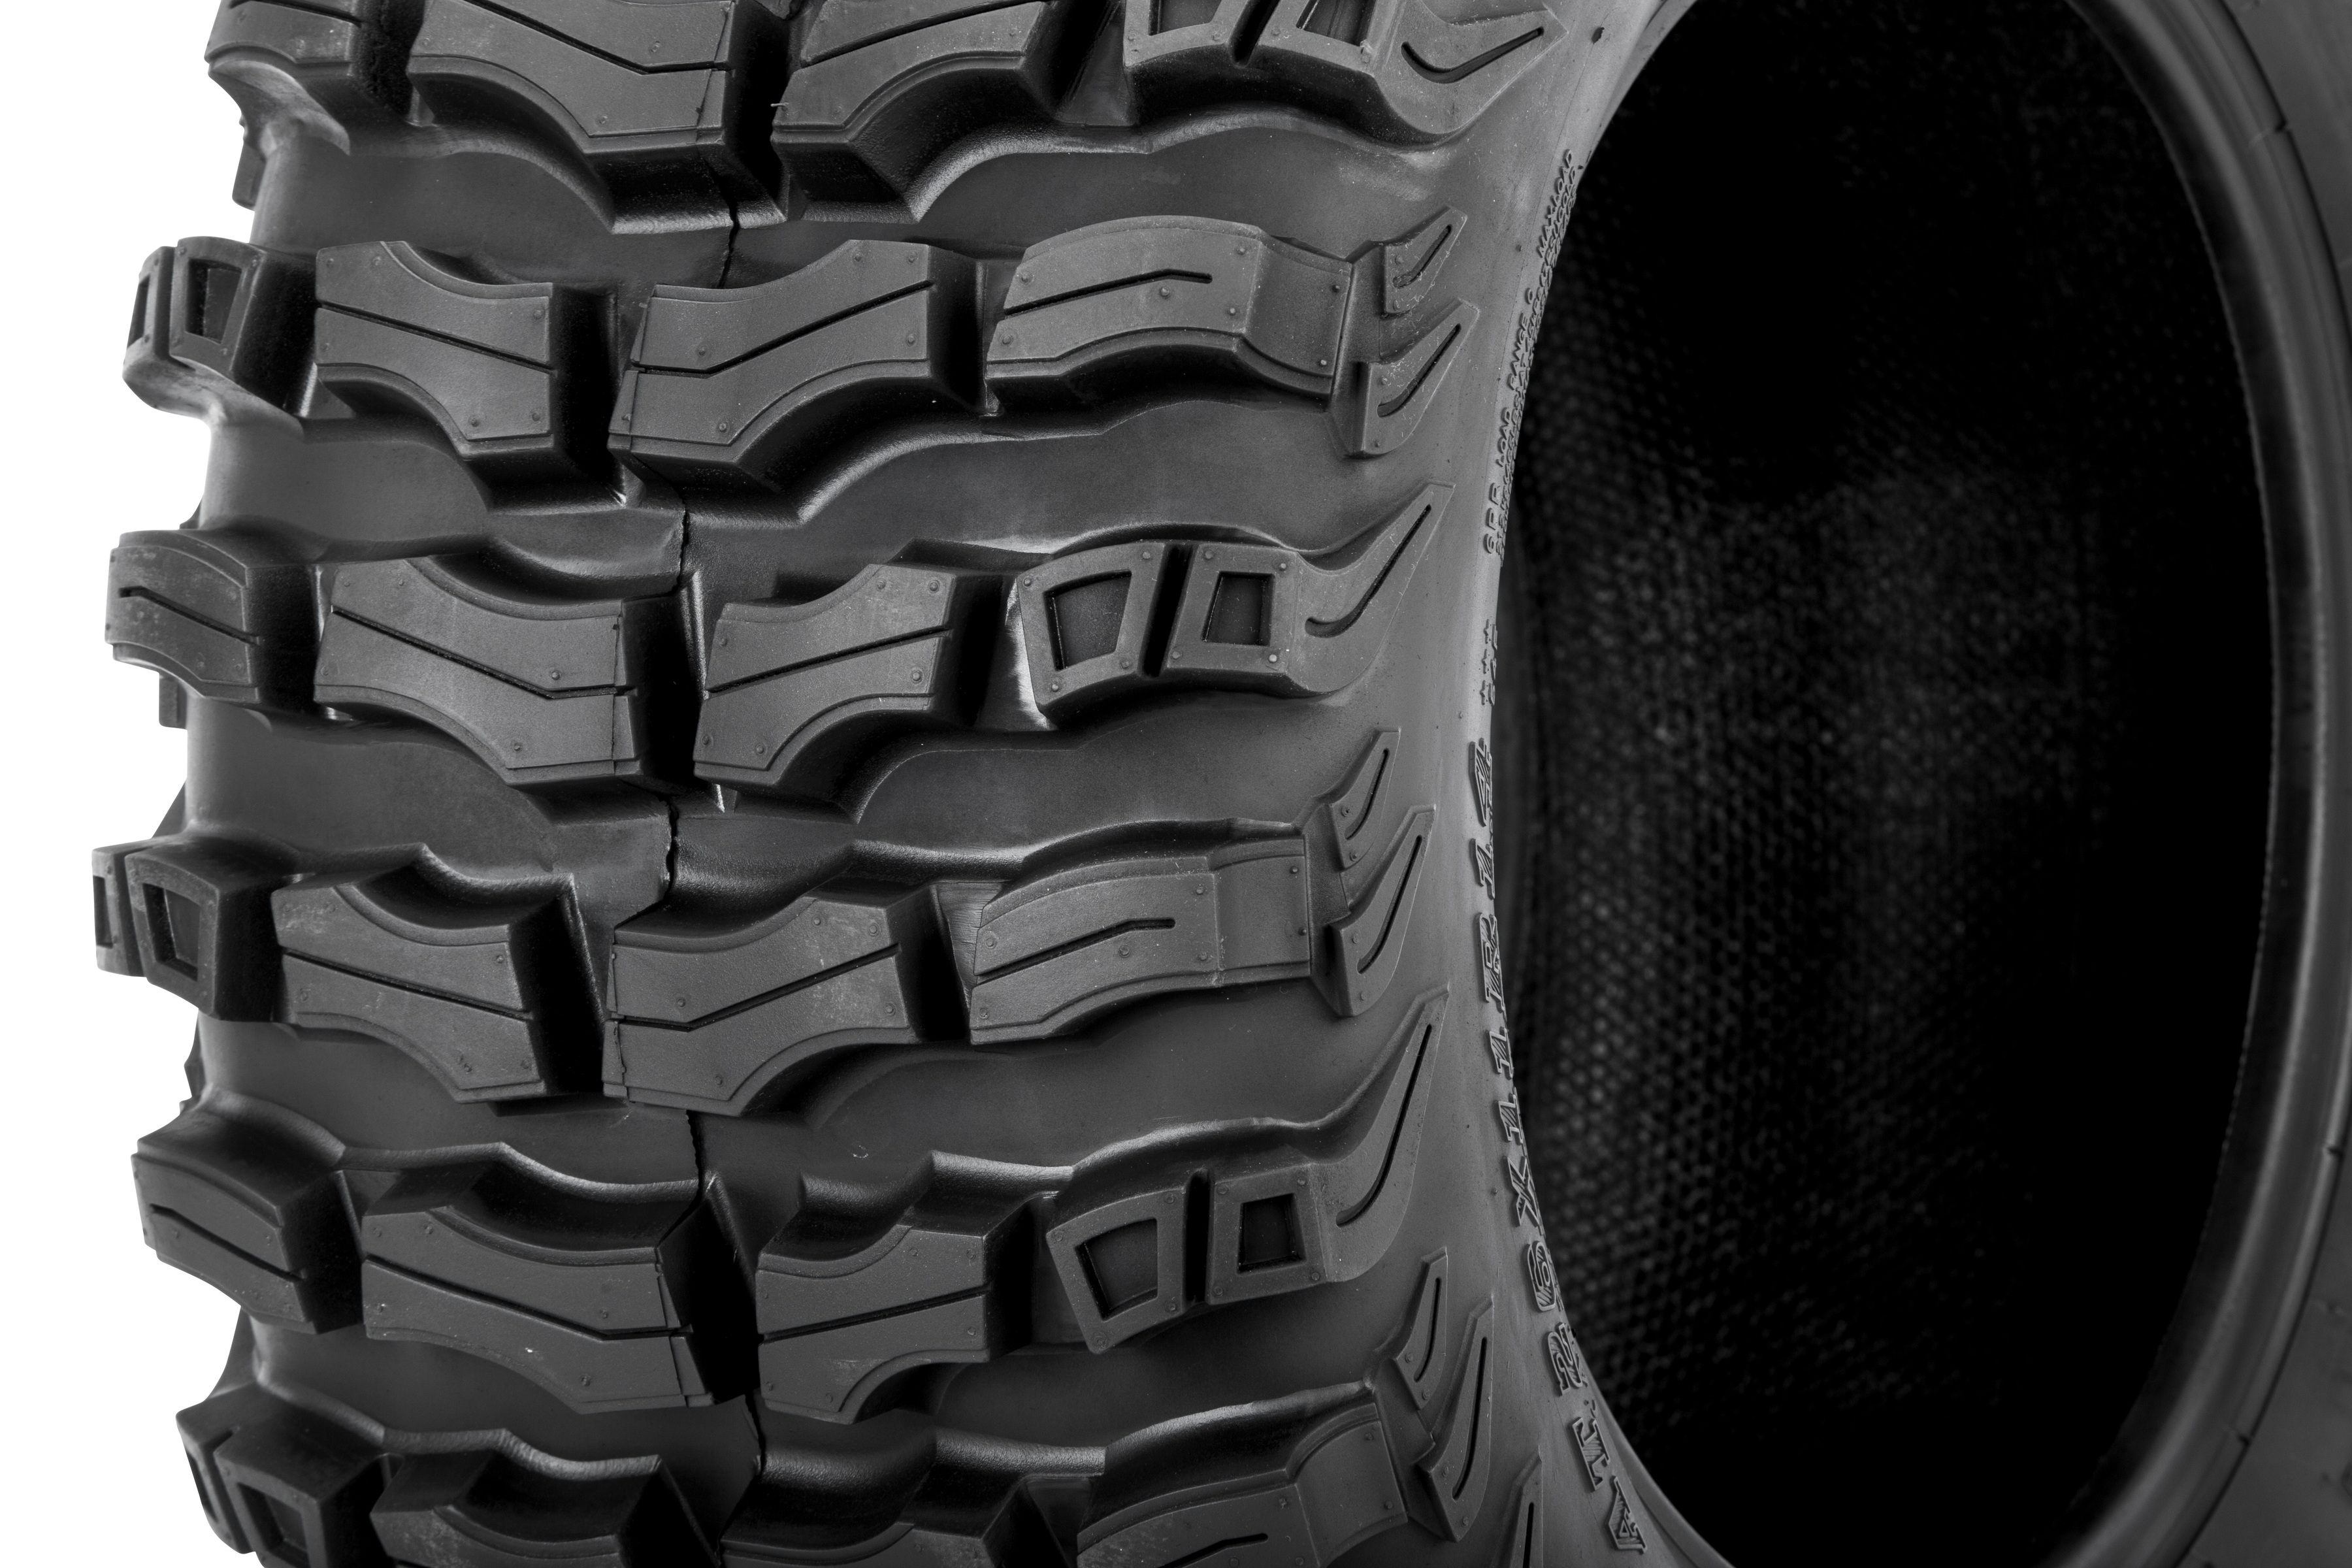 Buzz Saw R/T Front or Rear Tire 26X11Rx12 - Click Image to Close